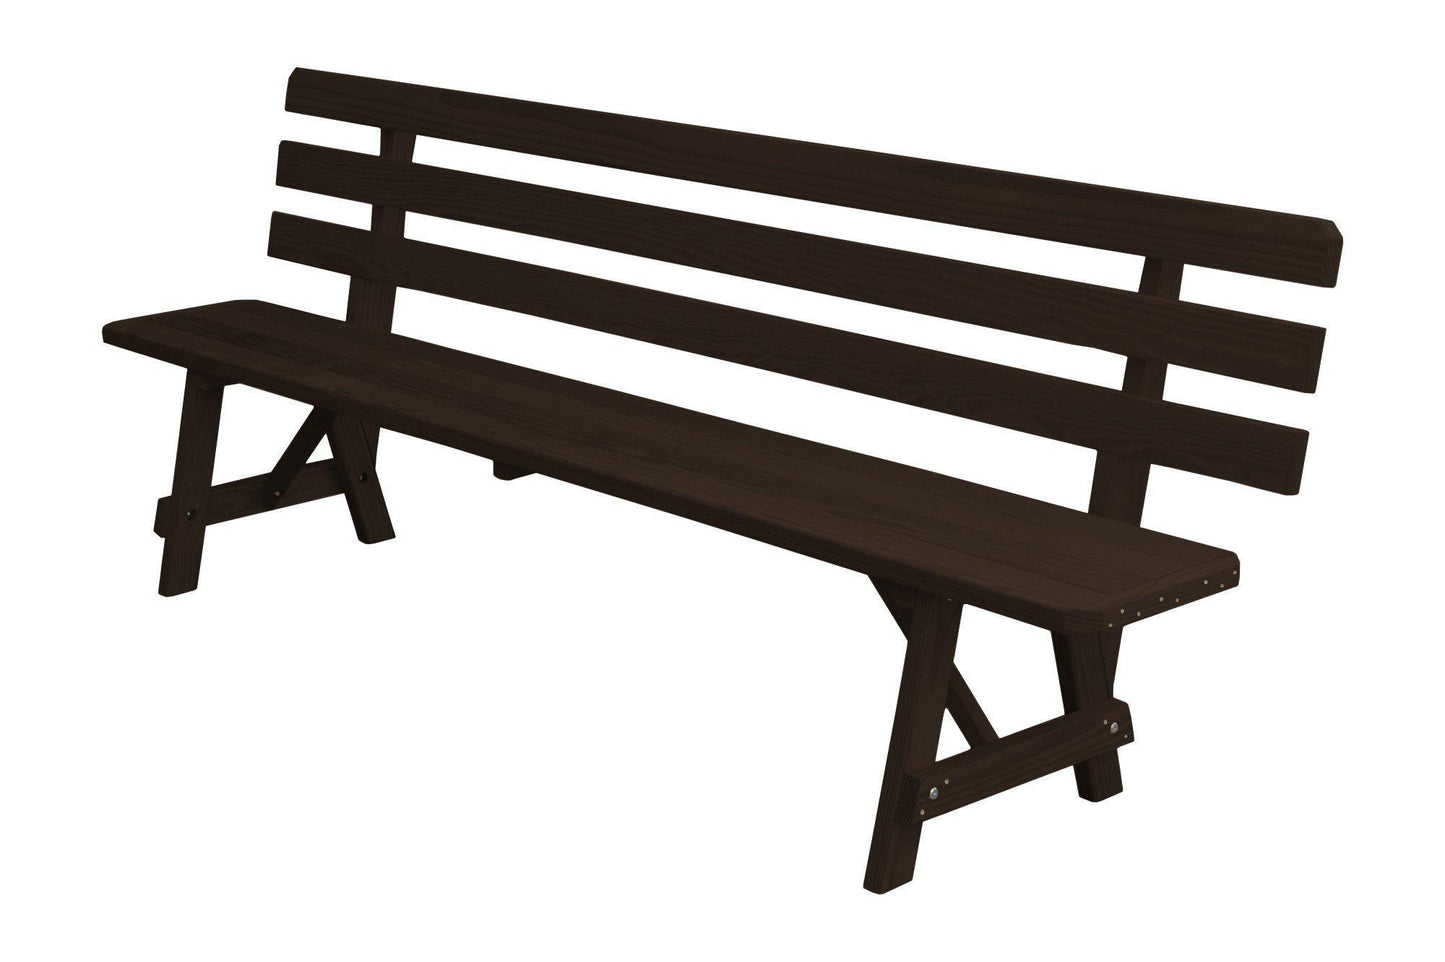 A&L Furniture Co. Yellow Pine 95" Traditional Backed Bench Only - LEAD TIME TO SHIP 10 BUSINESS DAYS